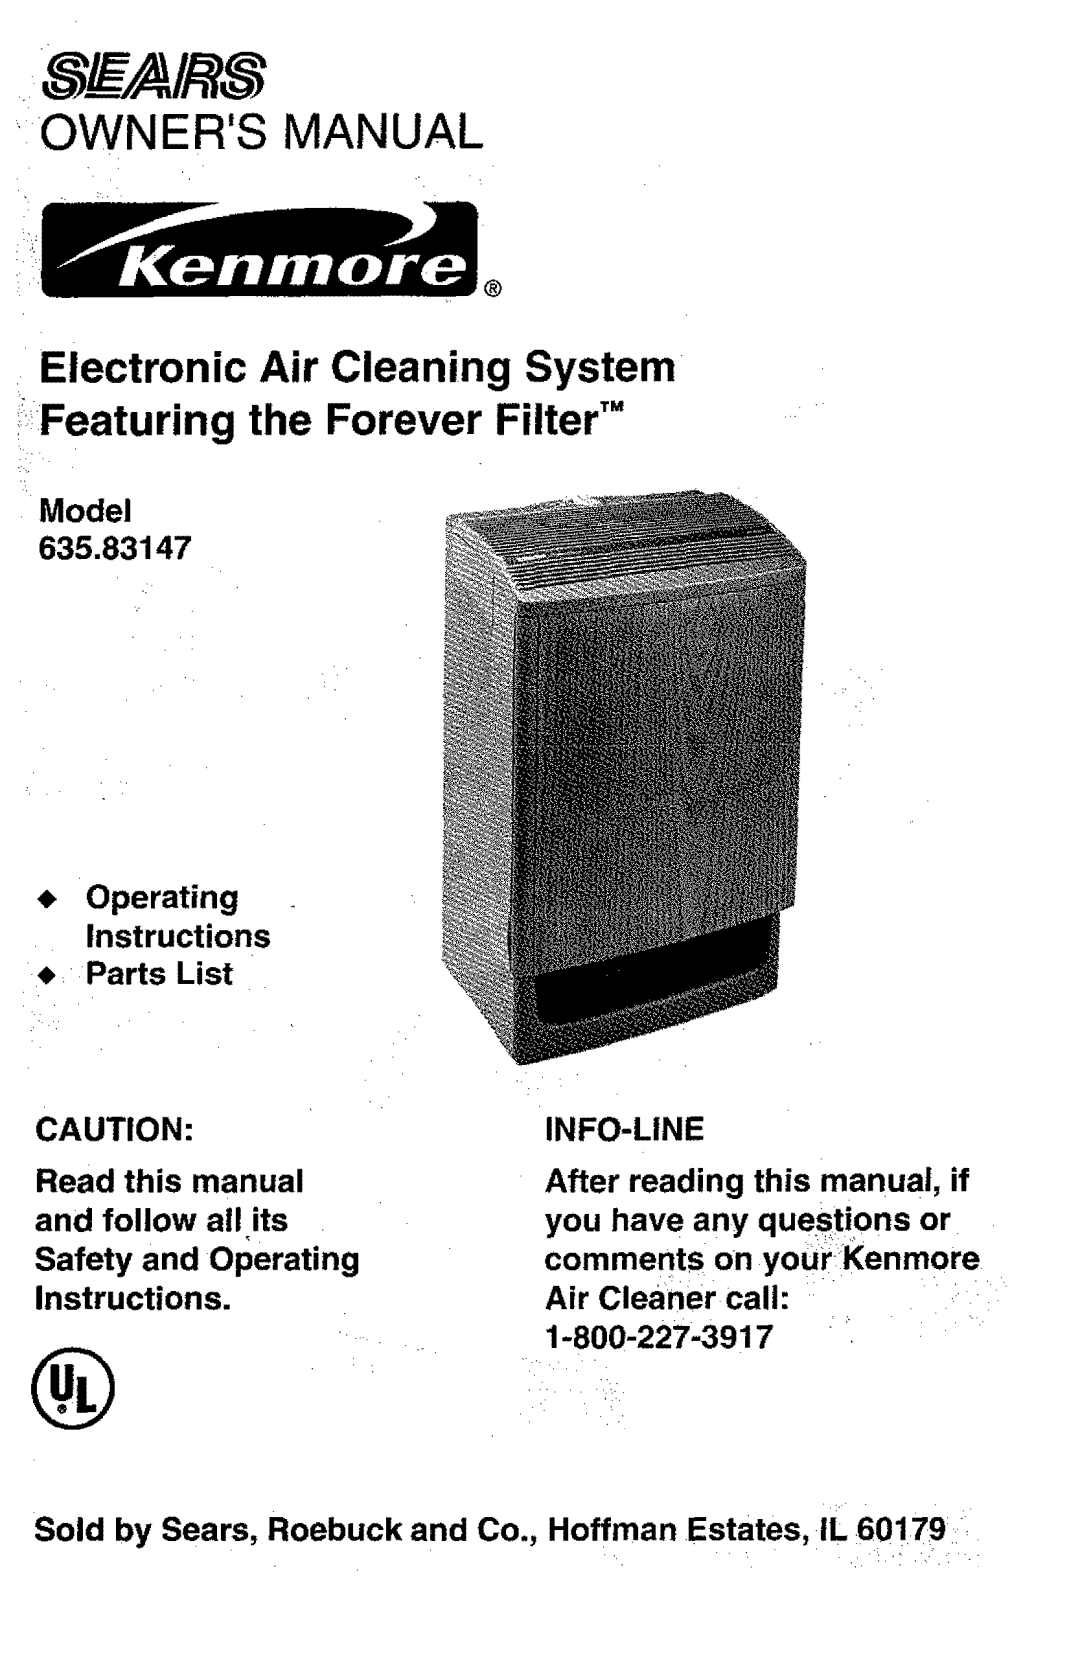 Kenmore 583, 63, 147 owner manual Model, Operating Instructions Parts List, Read this manual and follow all its, Info-Line 